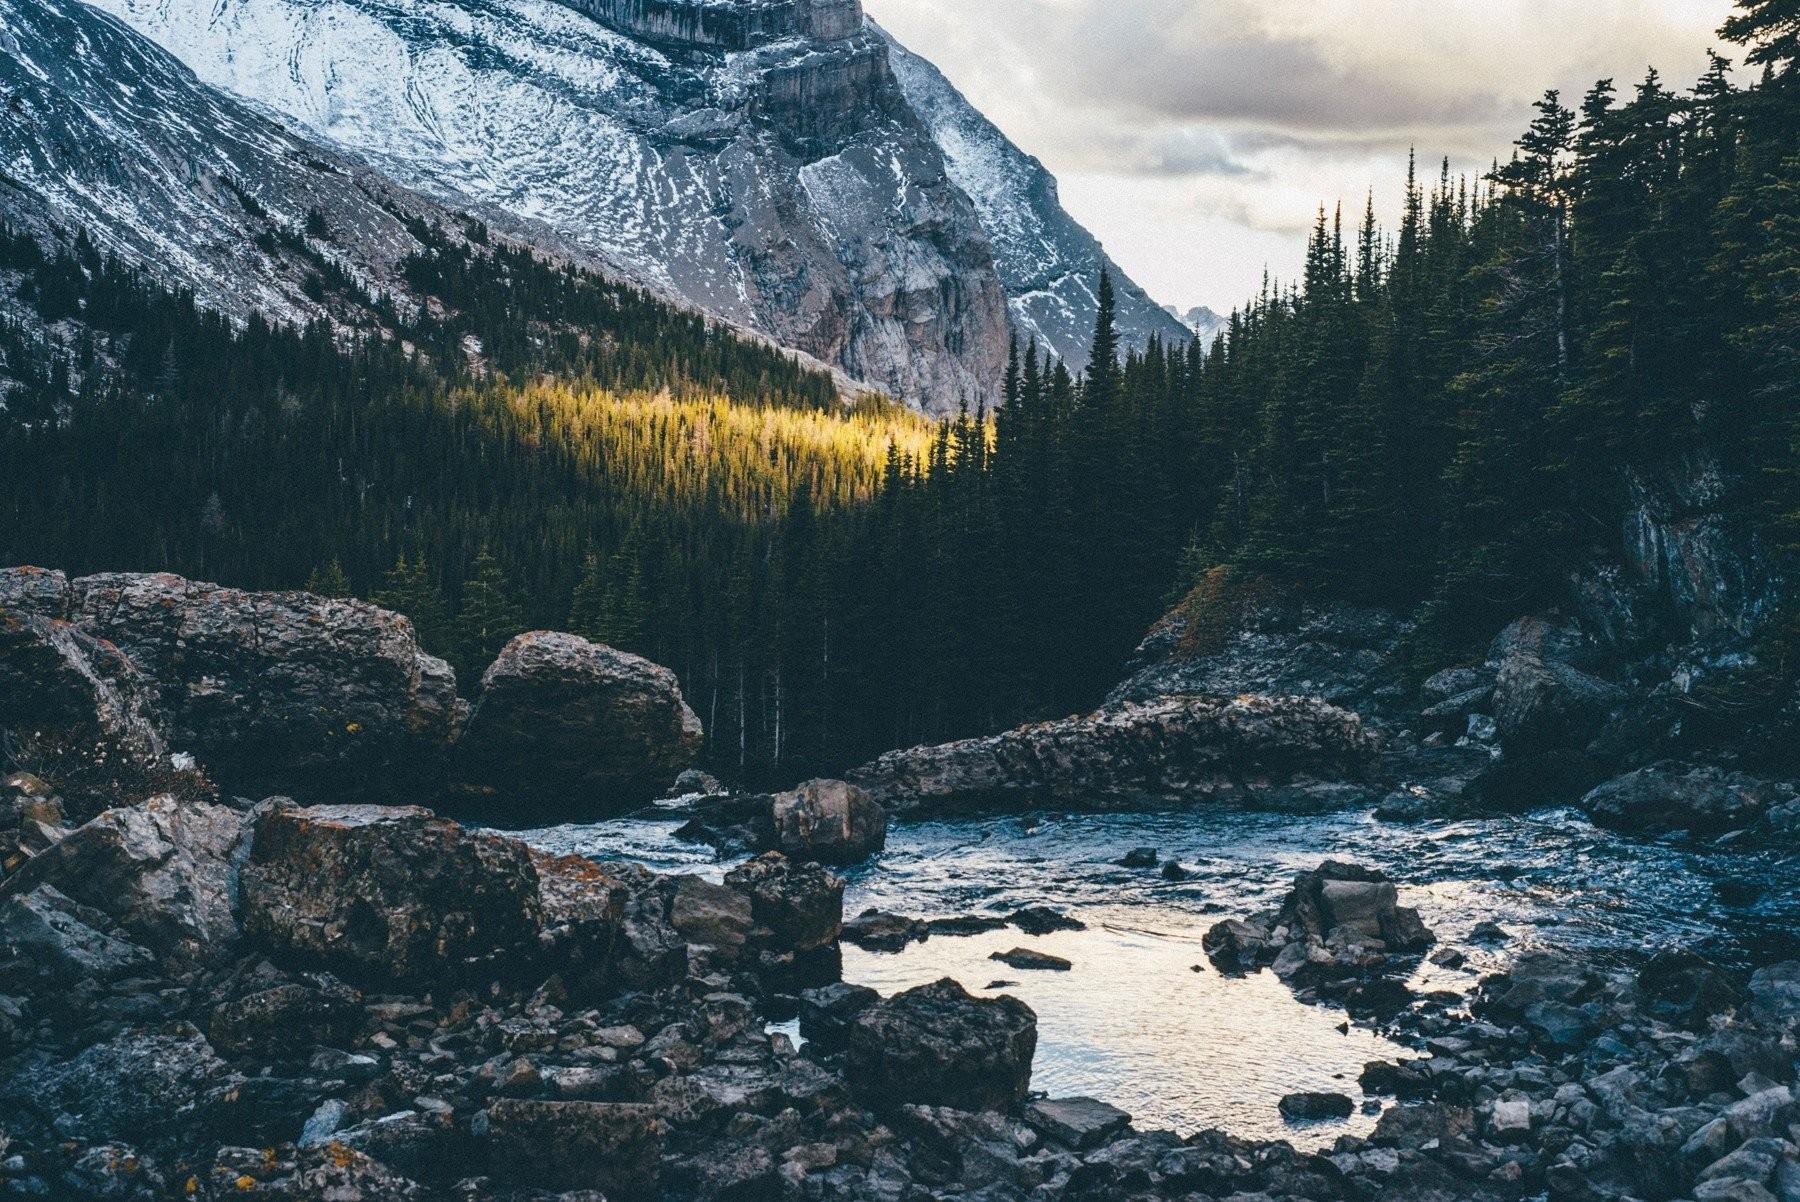 Mountains, Rock, Water, Nature, Tumblr, Mather Nature, Landscape